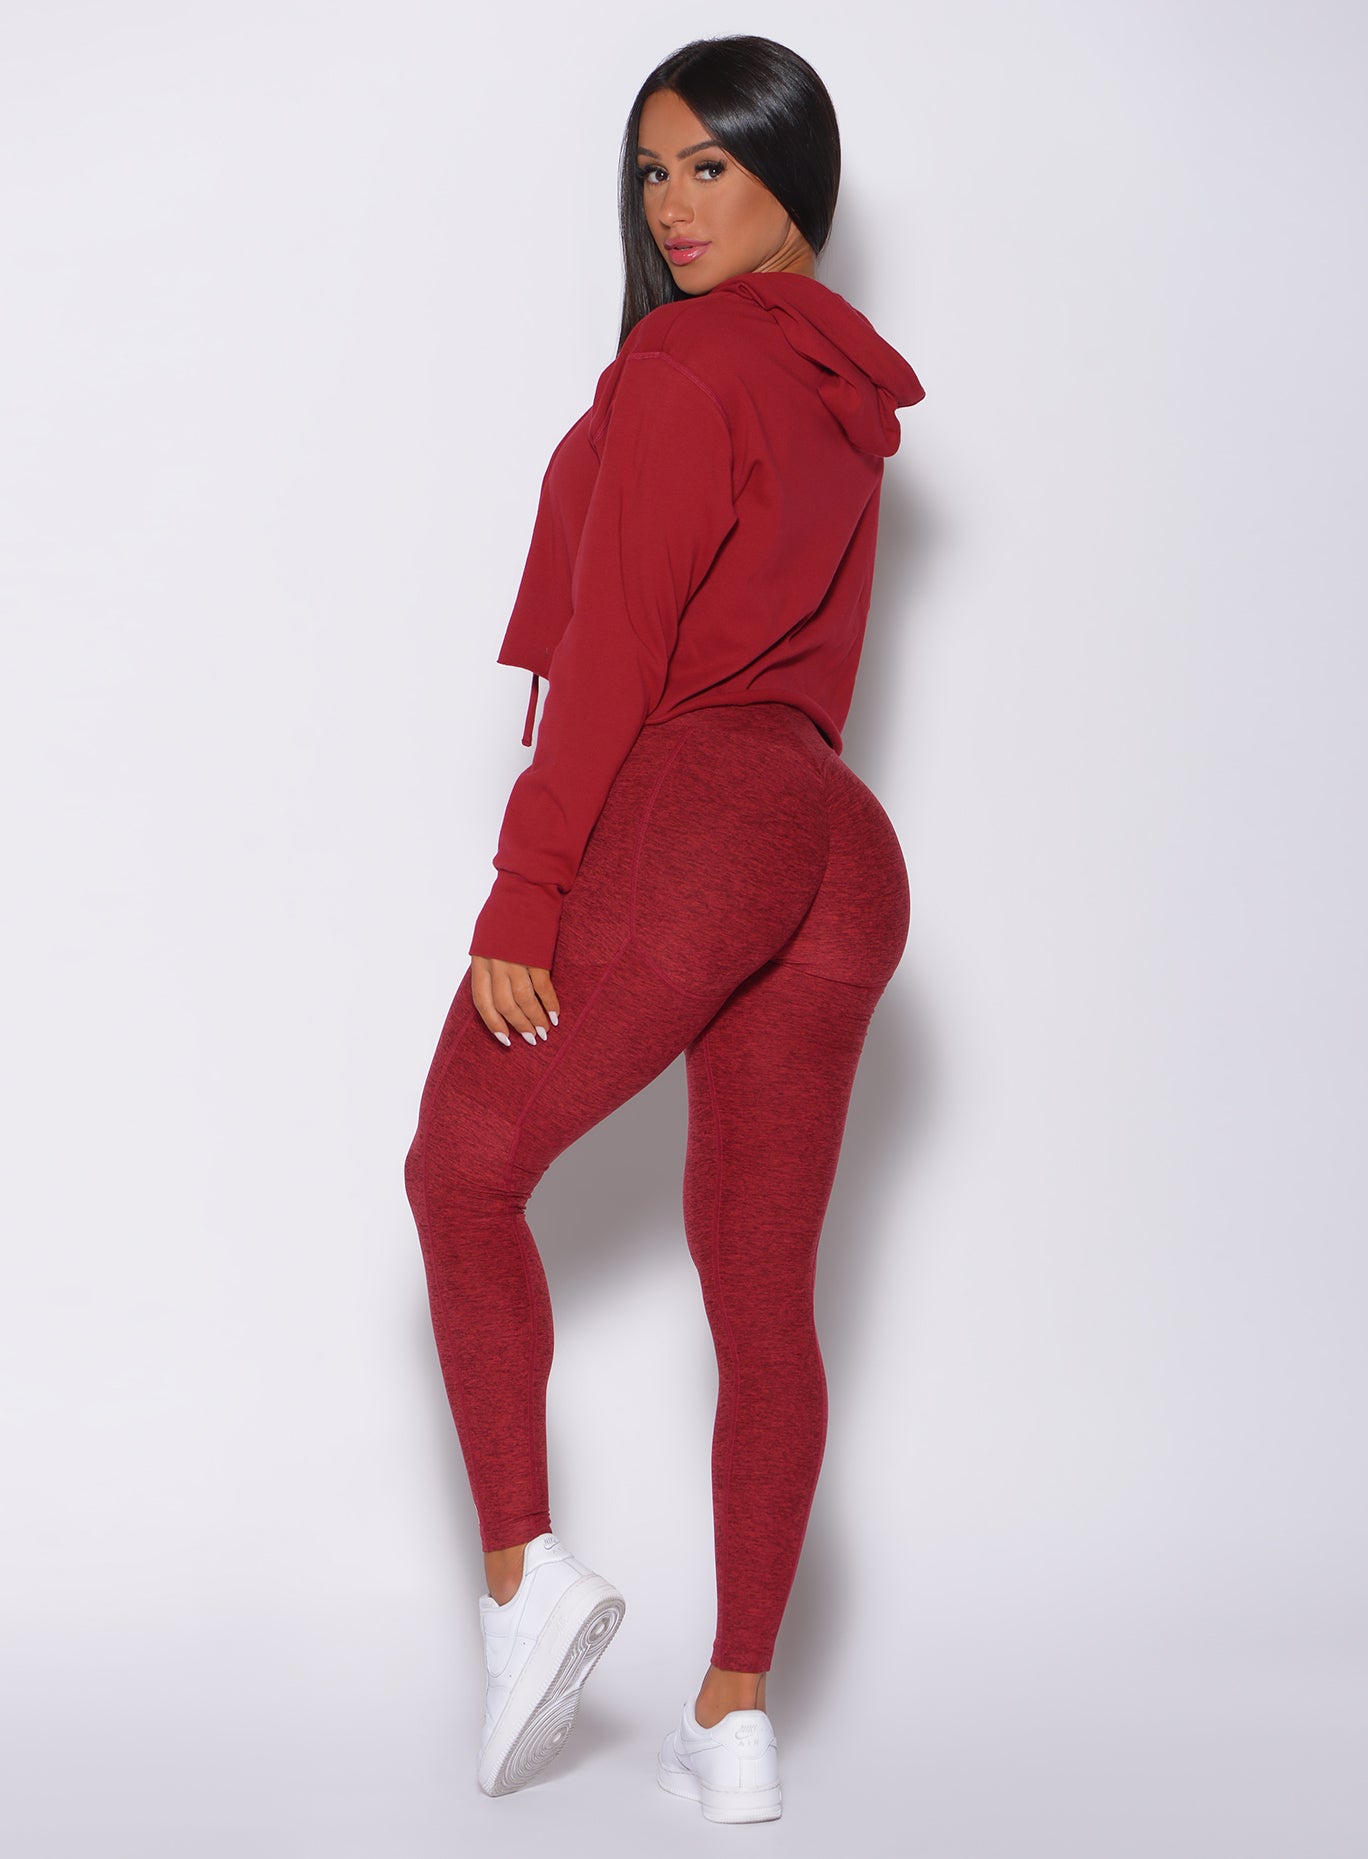 Left side profile view of a model in our bombshell hoodie in red rose color and a matching high waist leggings